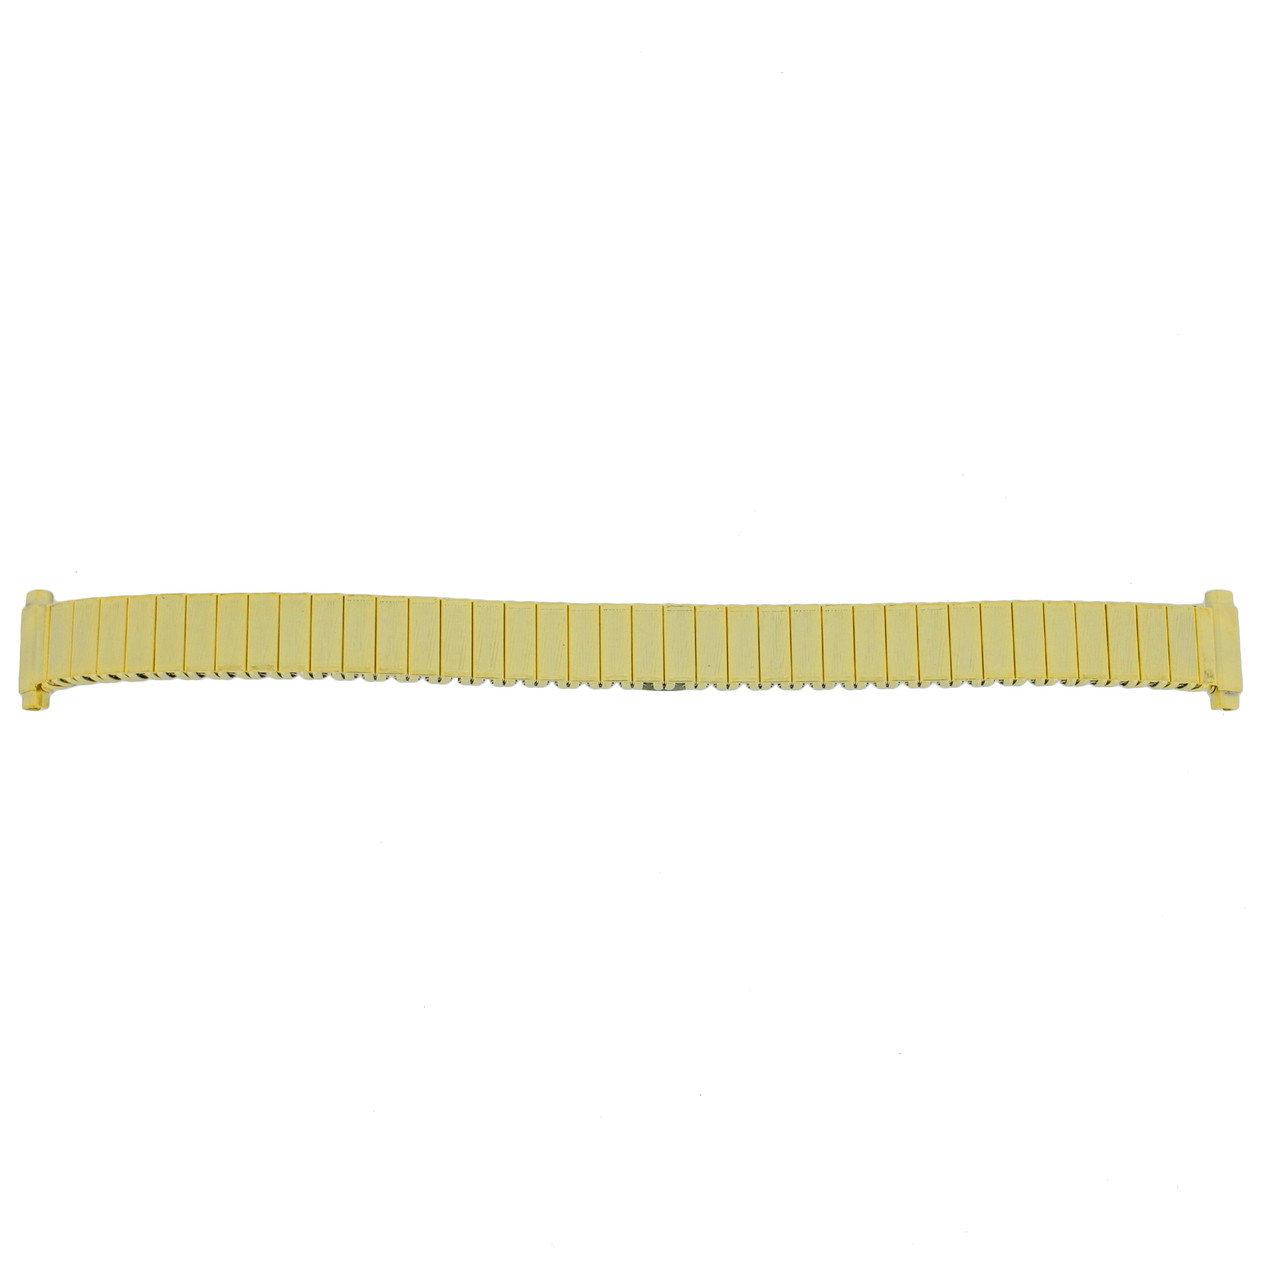 Watch Band Ladies Expansion Metal Stretch Gold-tone 11-14 mm - Main